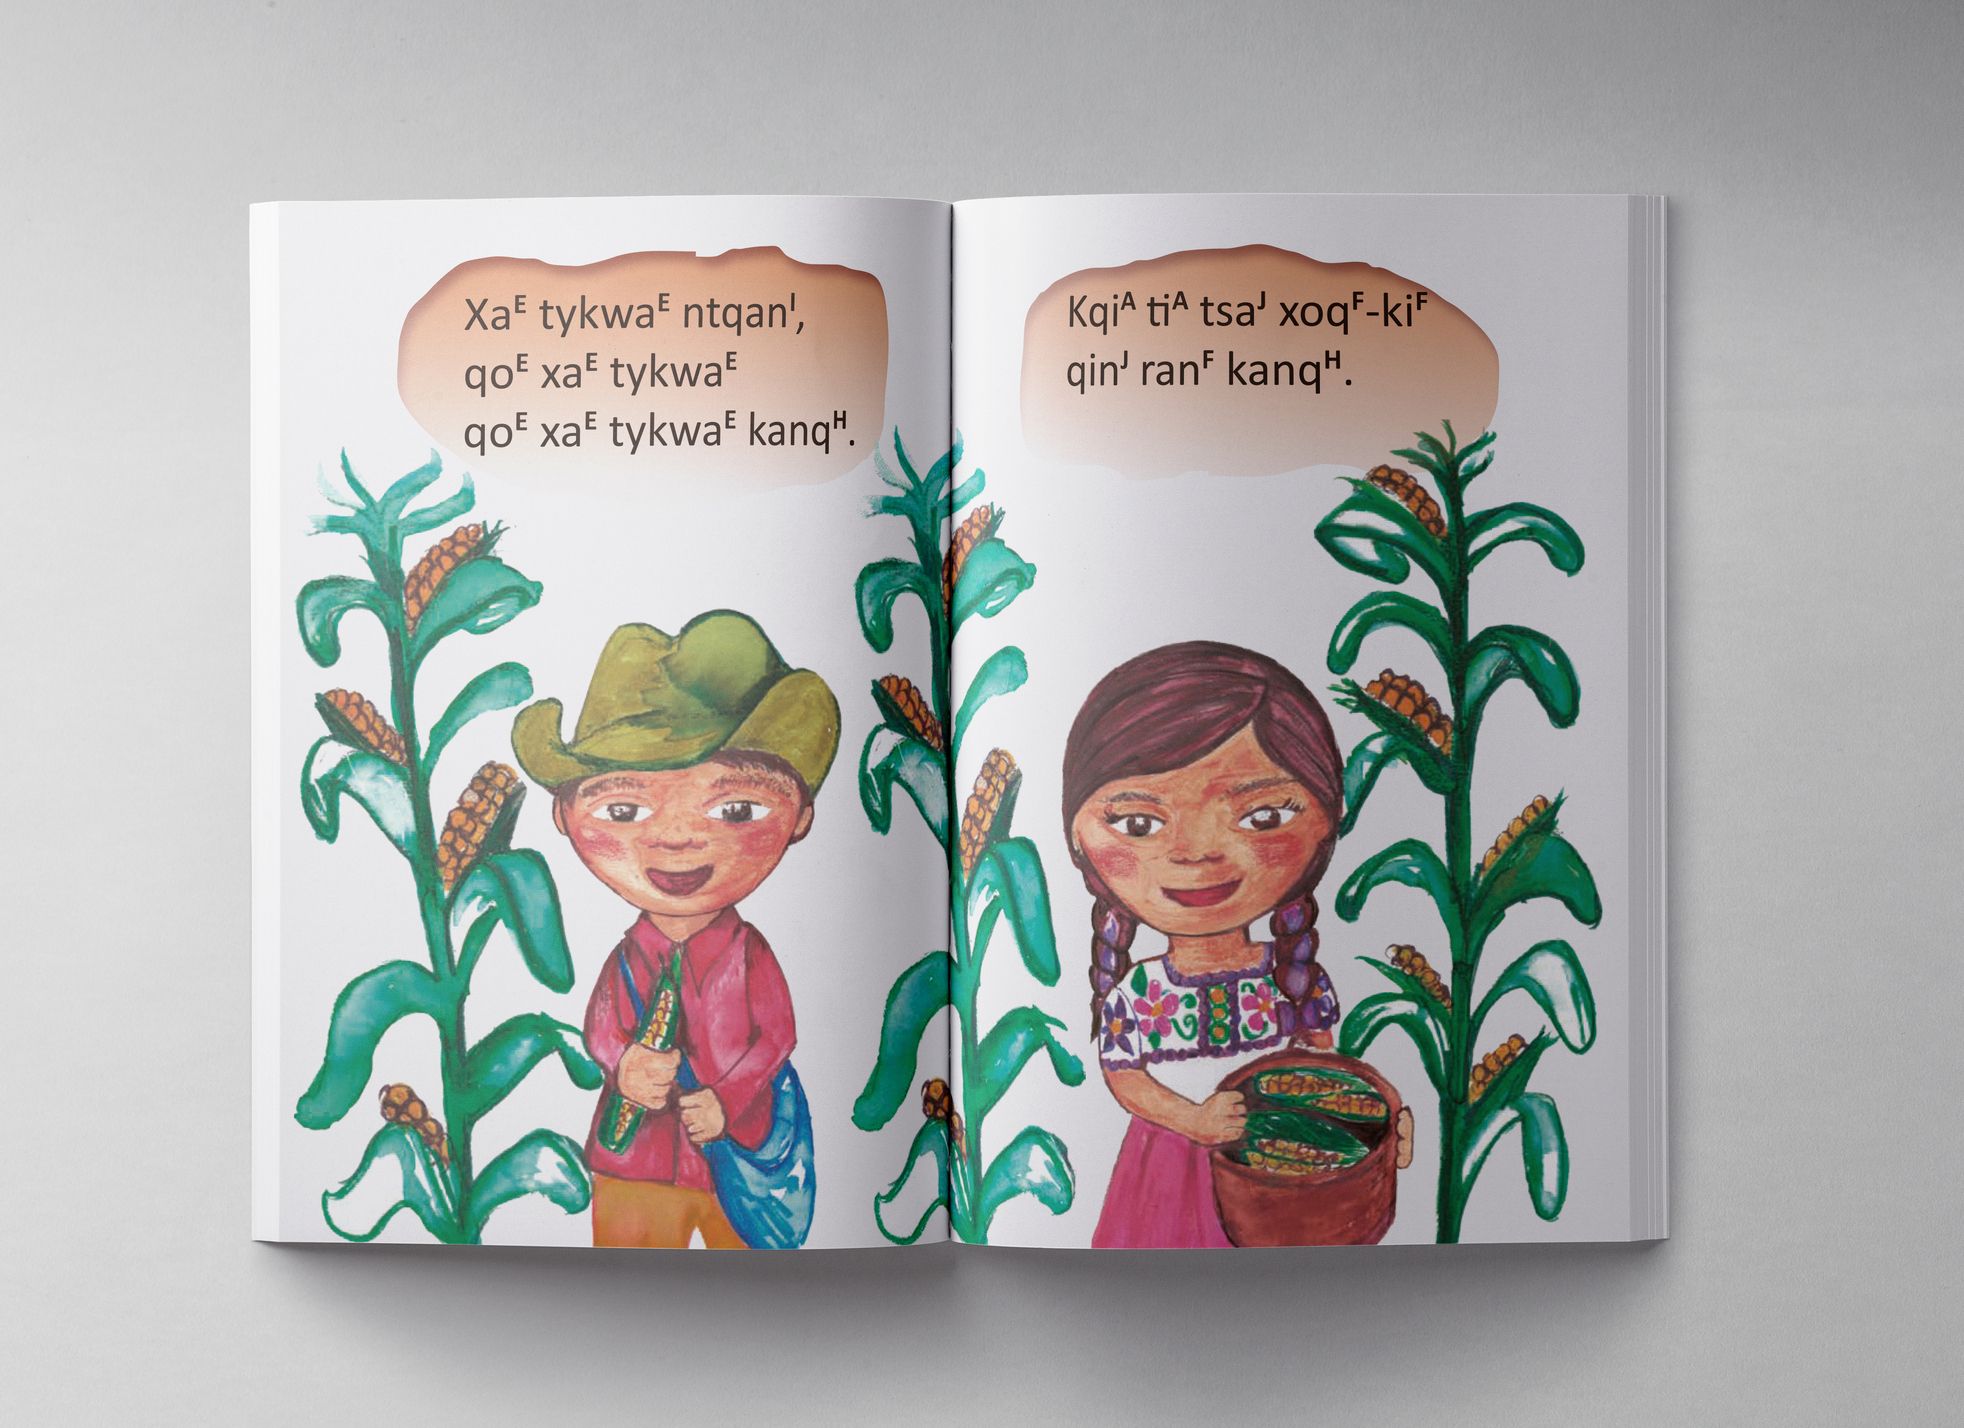 Photograph of a book in Chatino. It is open so two pages are visible. At the top of each page are 2-3 lines of written Chatino. Below the writing are colorful drawings of tall stalks of corn and two people. The person on the left is a man in a hat holding an ear of corn and a bag over his shoulder. The person on the right is a woman wearing two long braids and carrying a basket of corn.